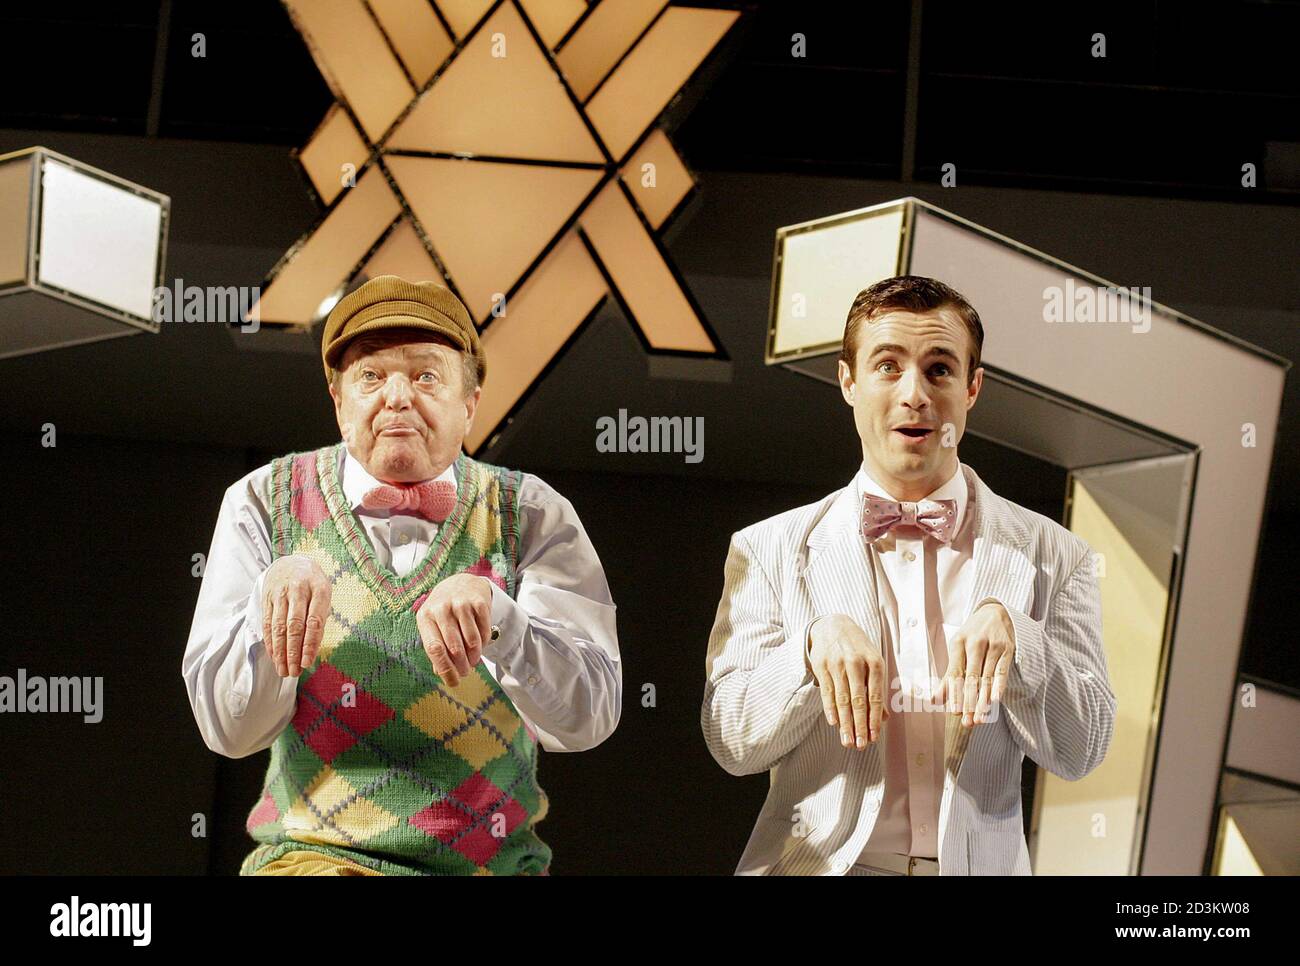 l-r: James Bolam (J B Biggley), Joe McFadden (J Pierrepont Finch) in HOW TO SUCCEED IN BUSINESS WITHOUT REALLY TRY at the Chichester Festival Theatre, West Sussex, England 05/05/2005 Musik & Texte: Frank Loesser Buch: Abe Burrows, Jack Weinstock & Willie Gilbert Design: Francis O'Connor Beleuchtung: Chris Ellis Choreograph: Stephen Mear Regie: Martin Duncan Stockfoto